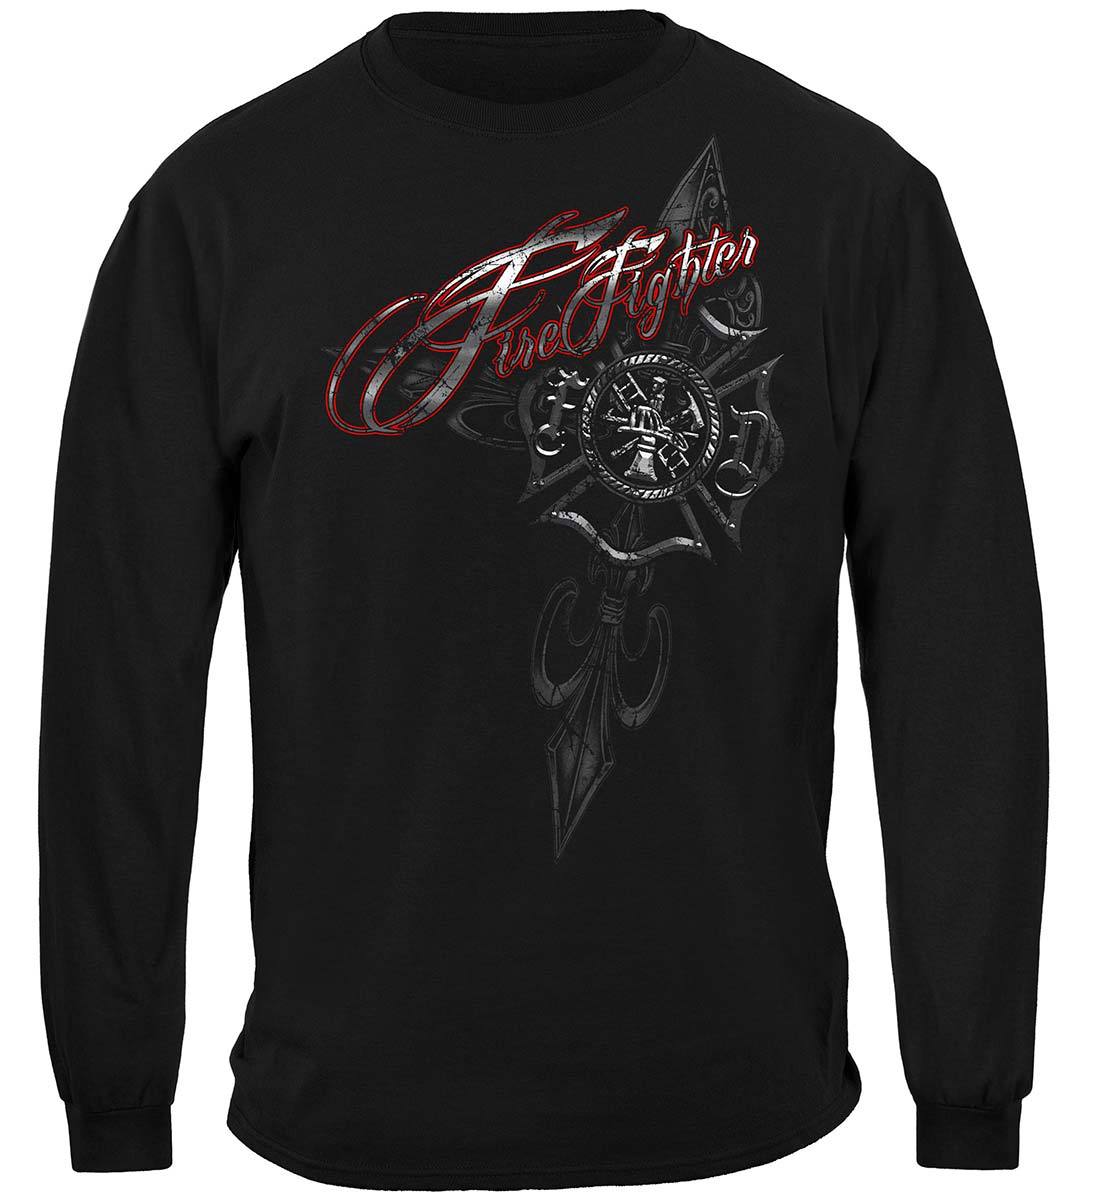 Firefighter Red Script Red Foil Premium Hooded Sweat Shirt